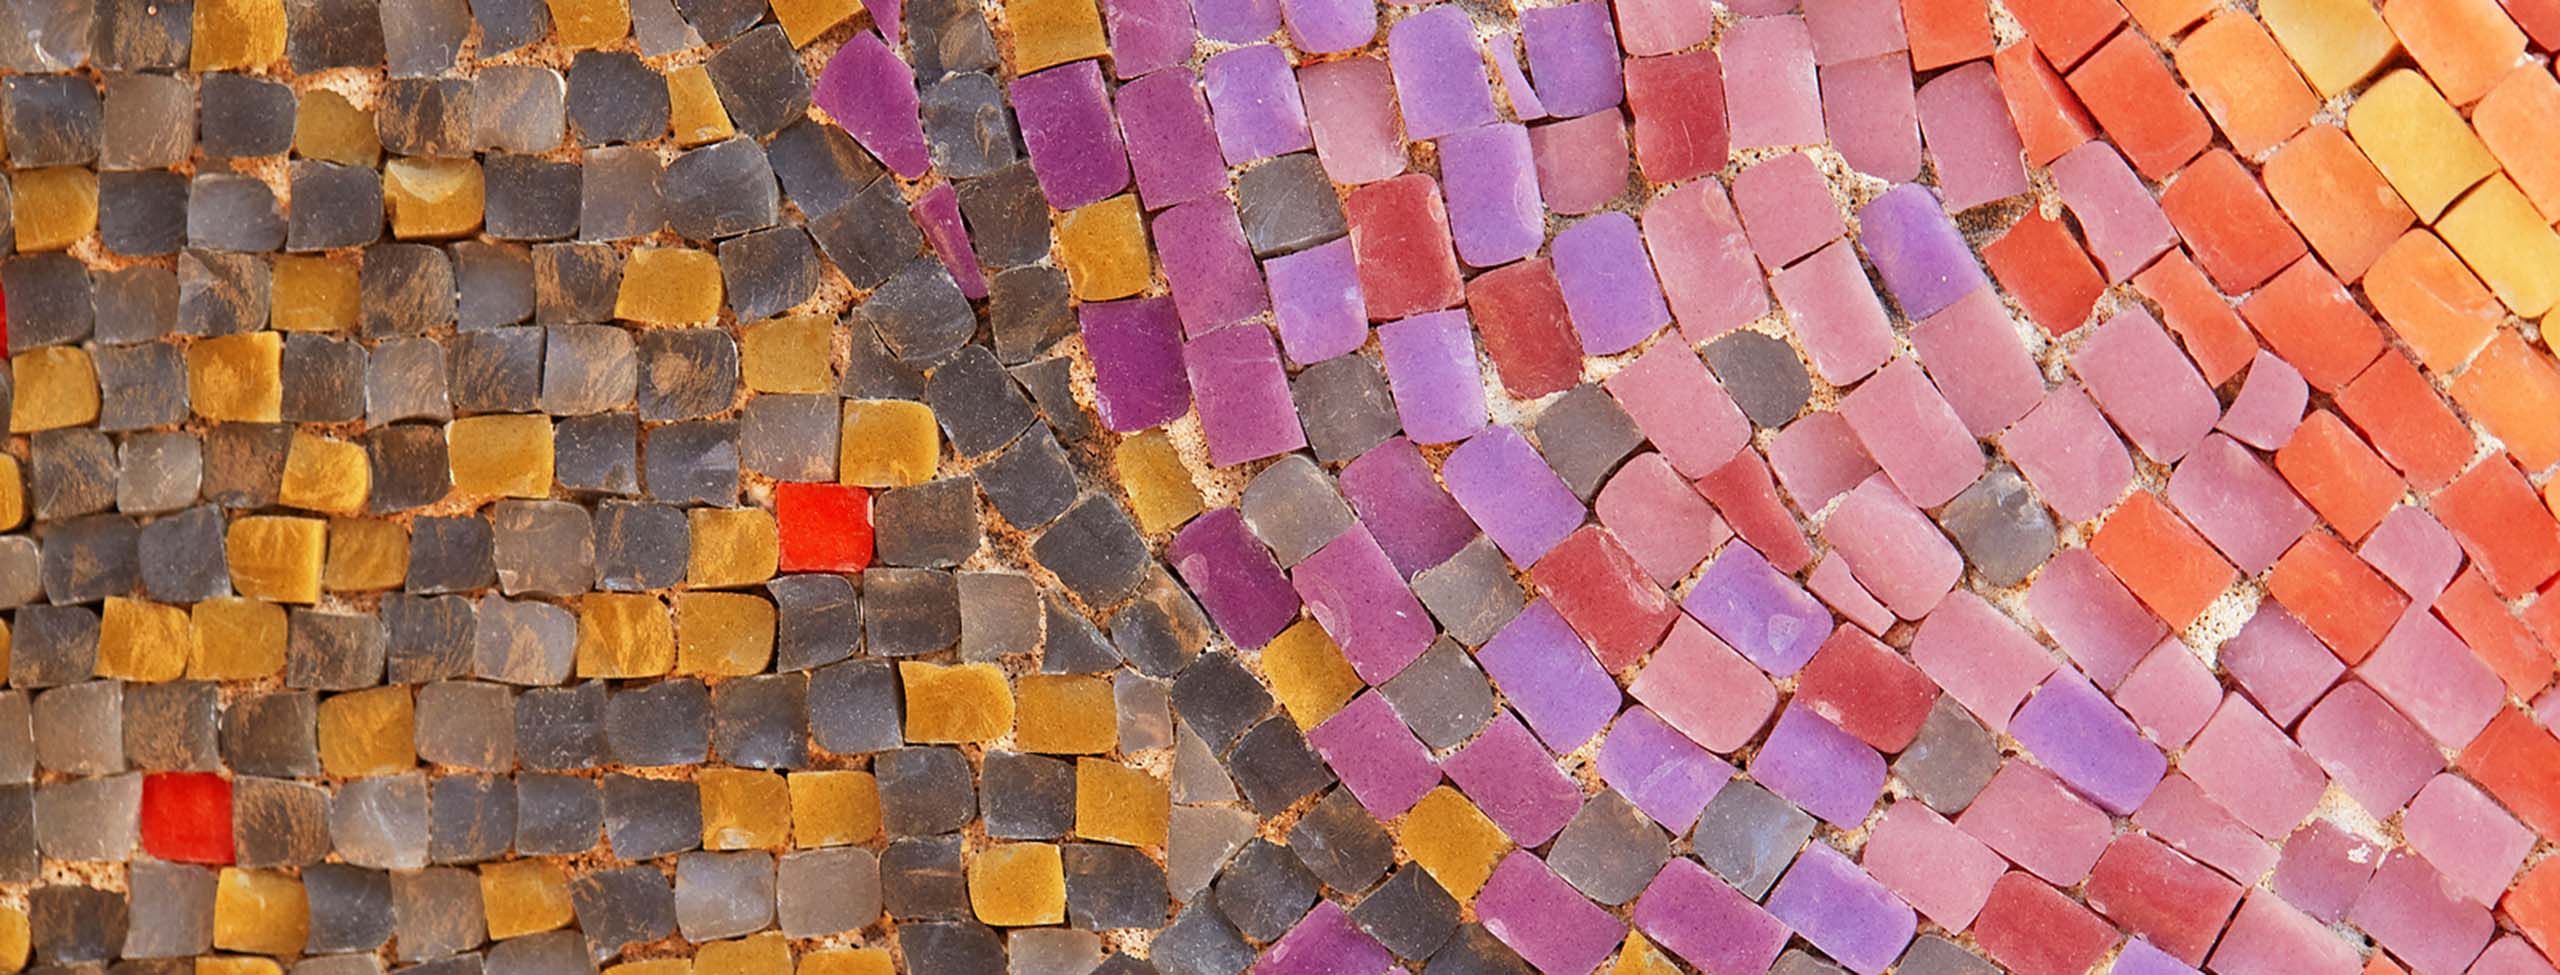 Colorful glass and stone mosaic tiles